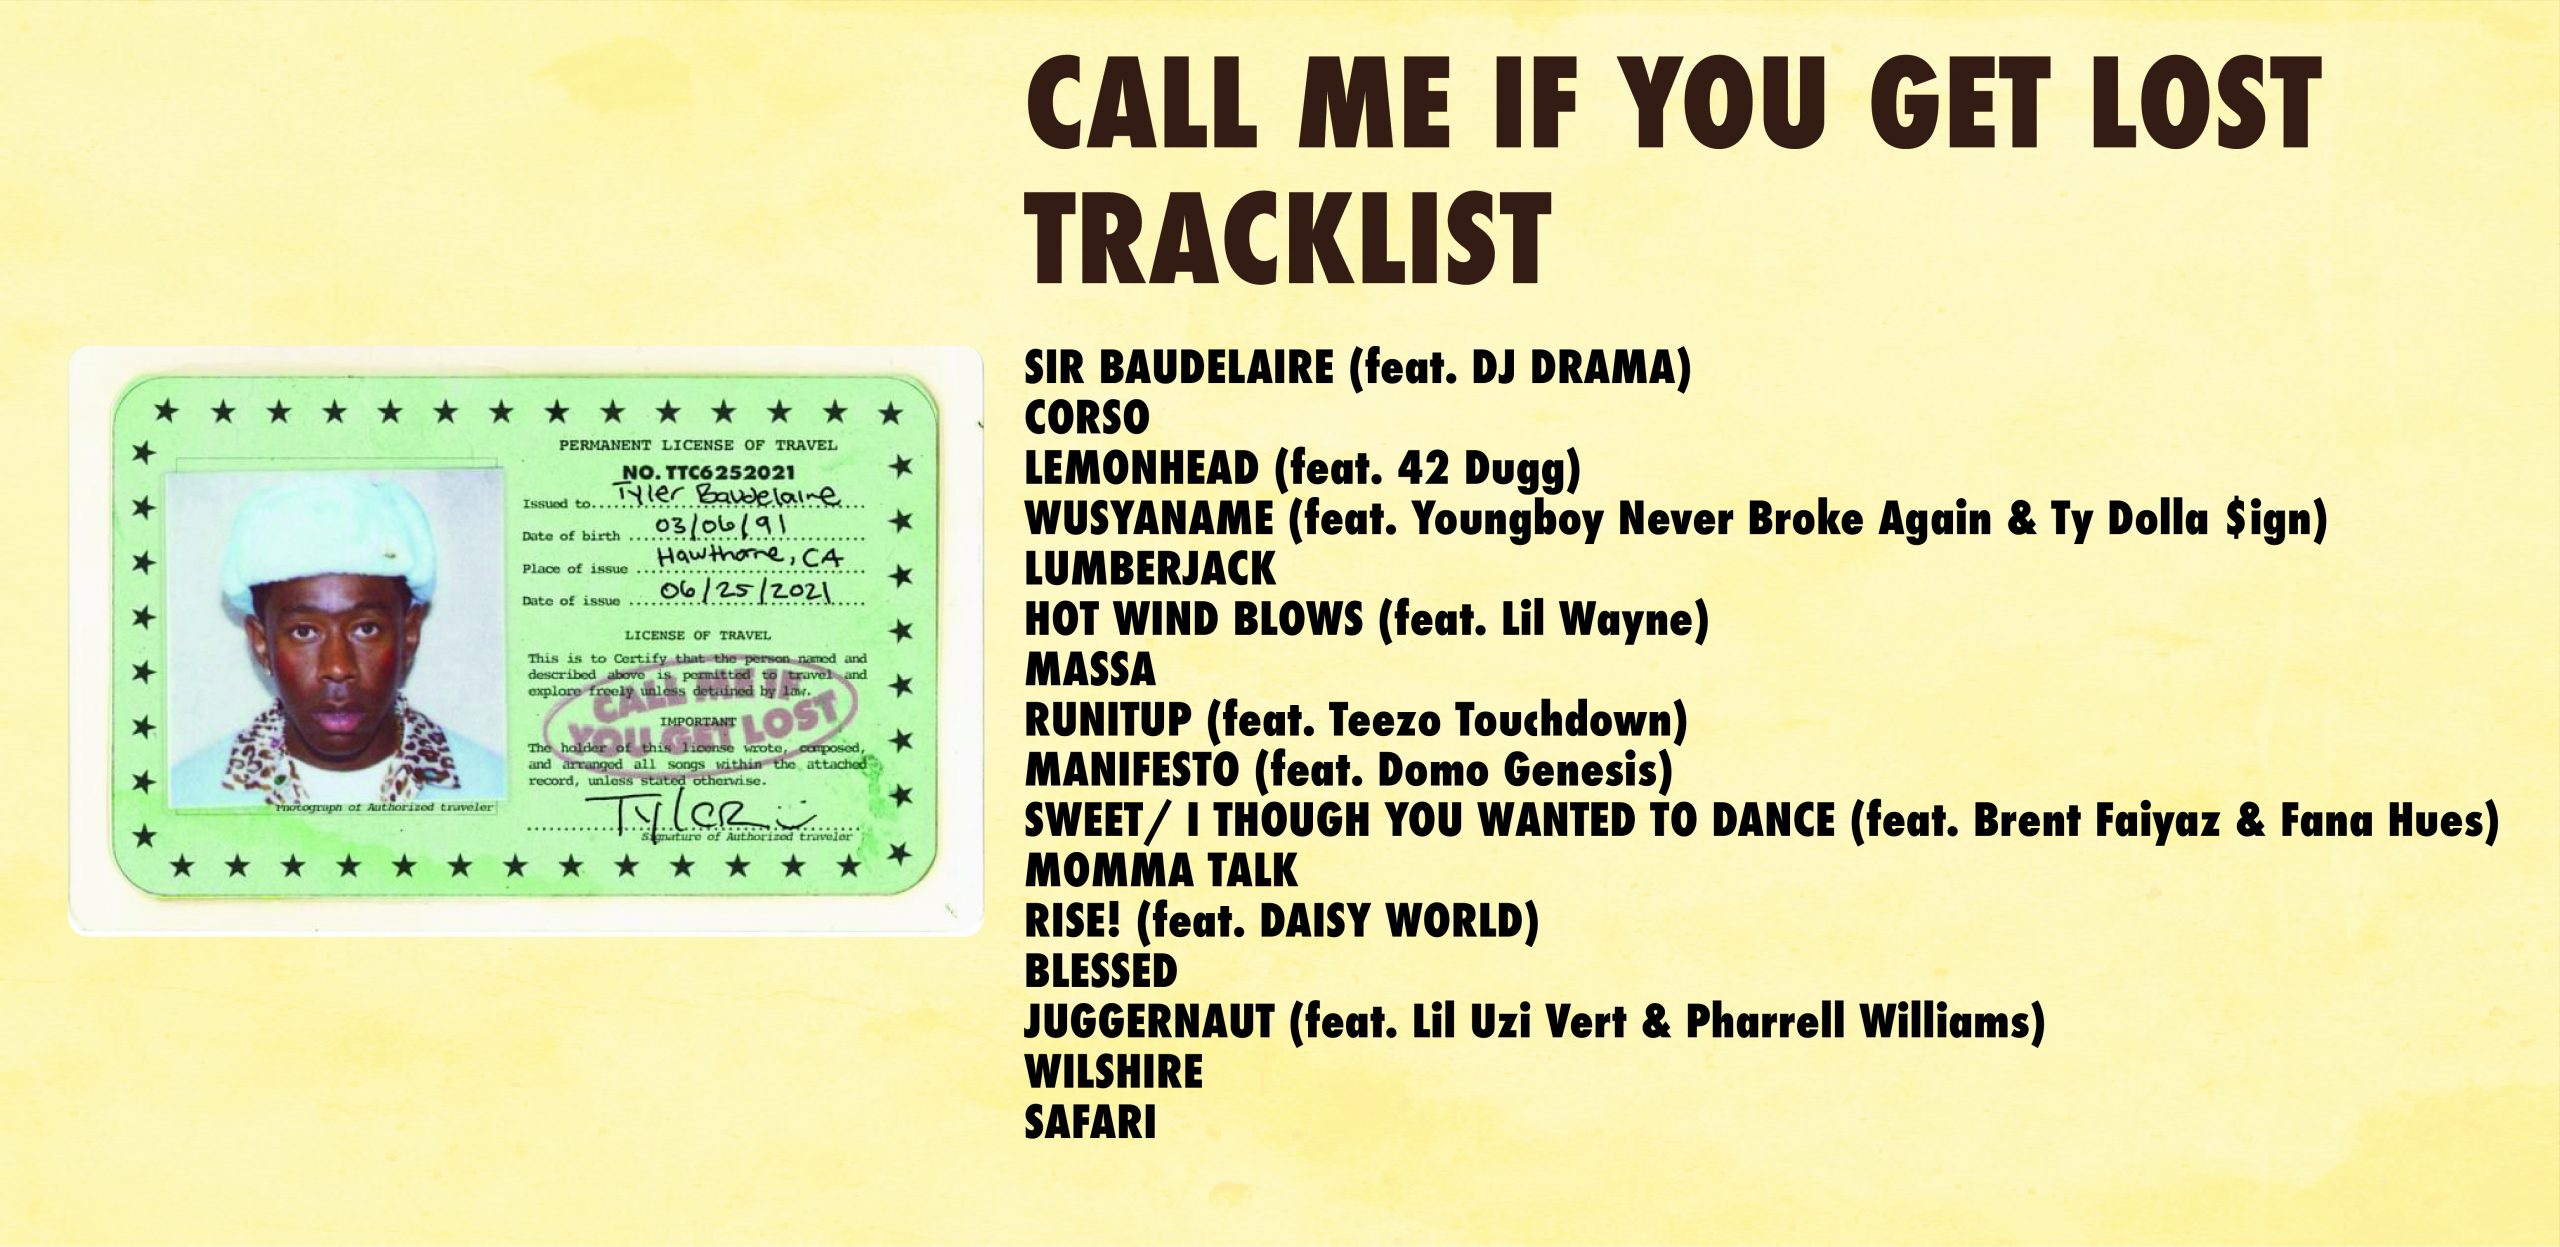 First Impressions of Tyler, the Creator's New Album 'Call Me If You Get  Lost